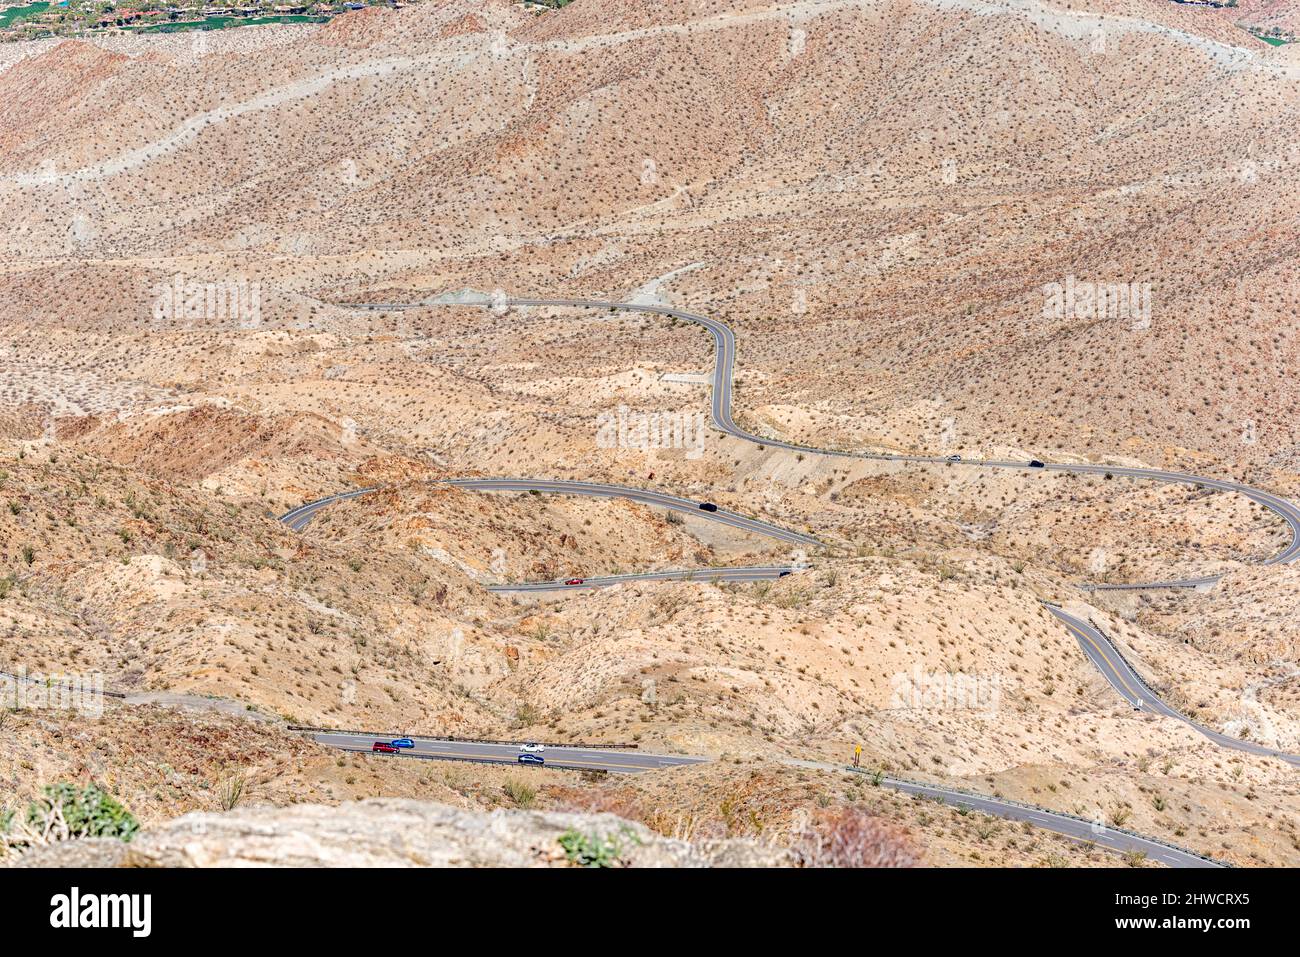 Coachella Valley Vista Point. Palm Springs, California, USA. Looking down on cars on Highway 74. Stock Photo